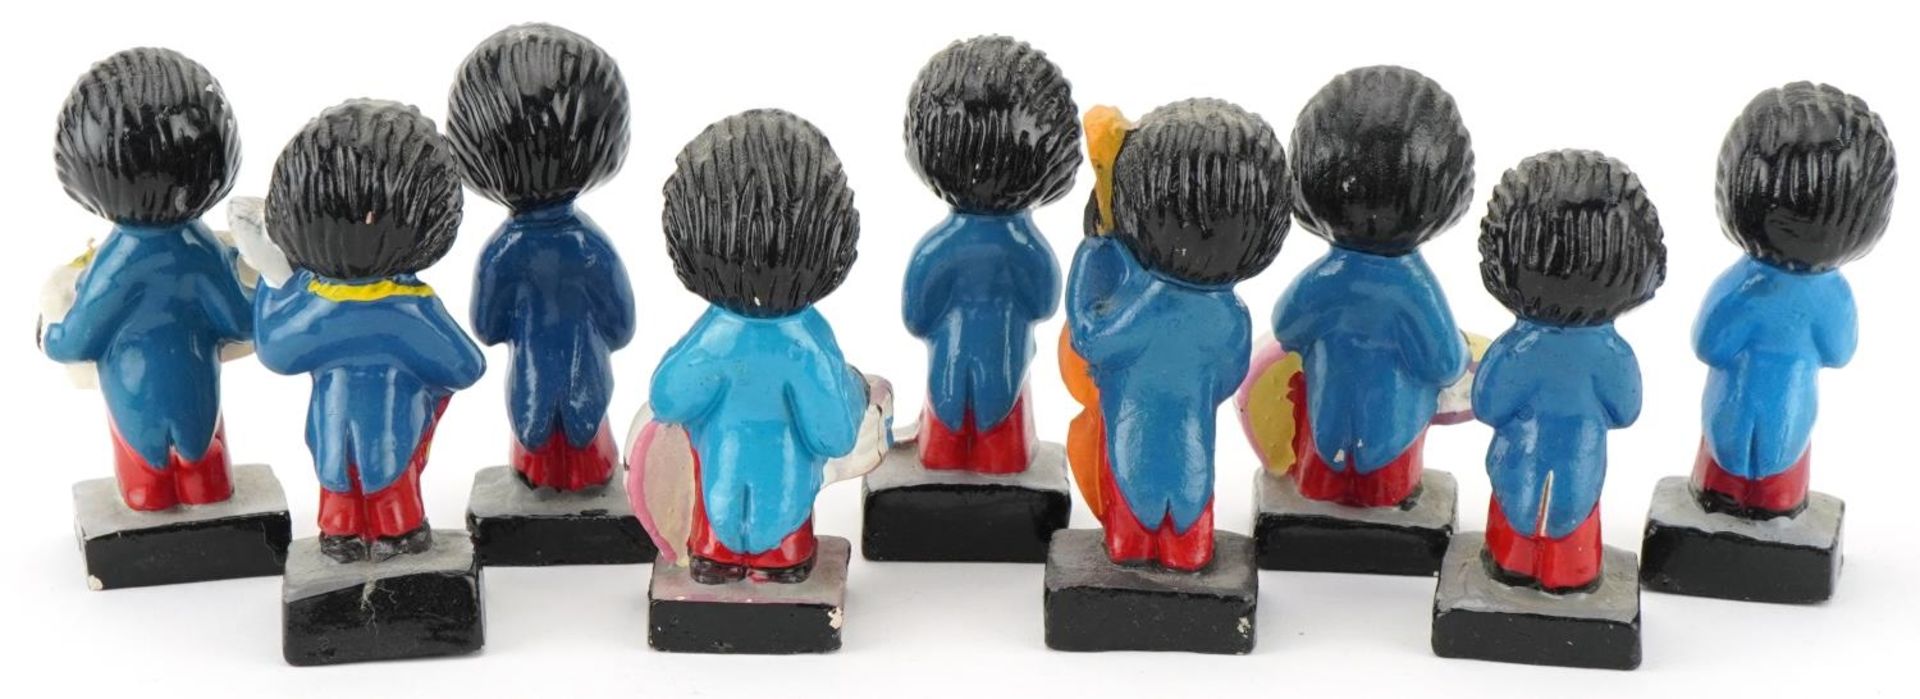 Nine vintage Robertson's advertising hand painted band figures, each 7cm high - Image 4 of 5